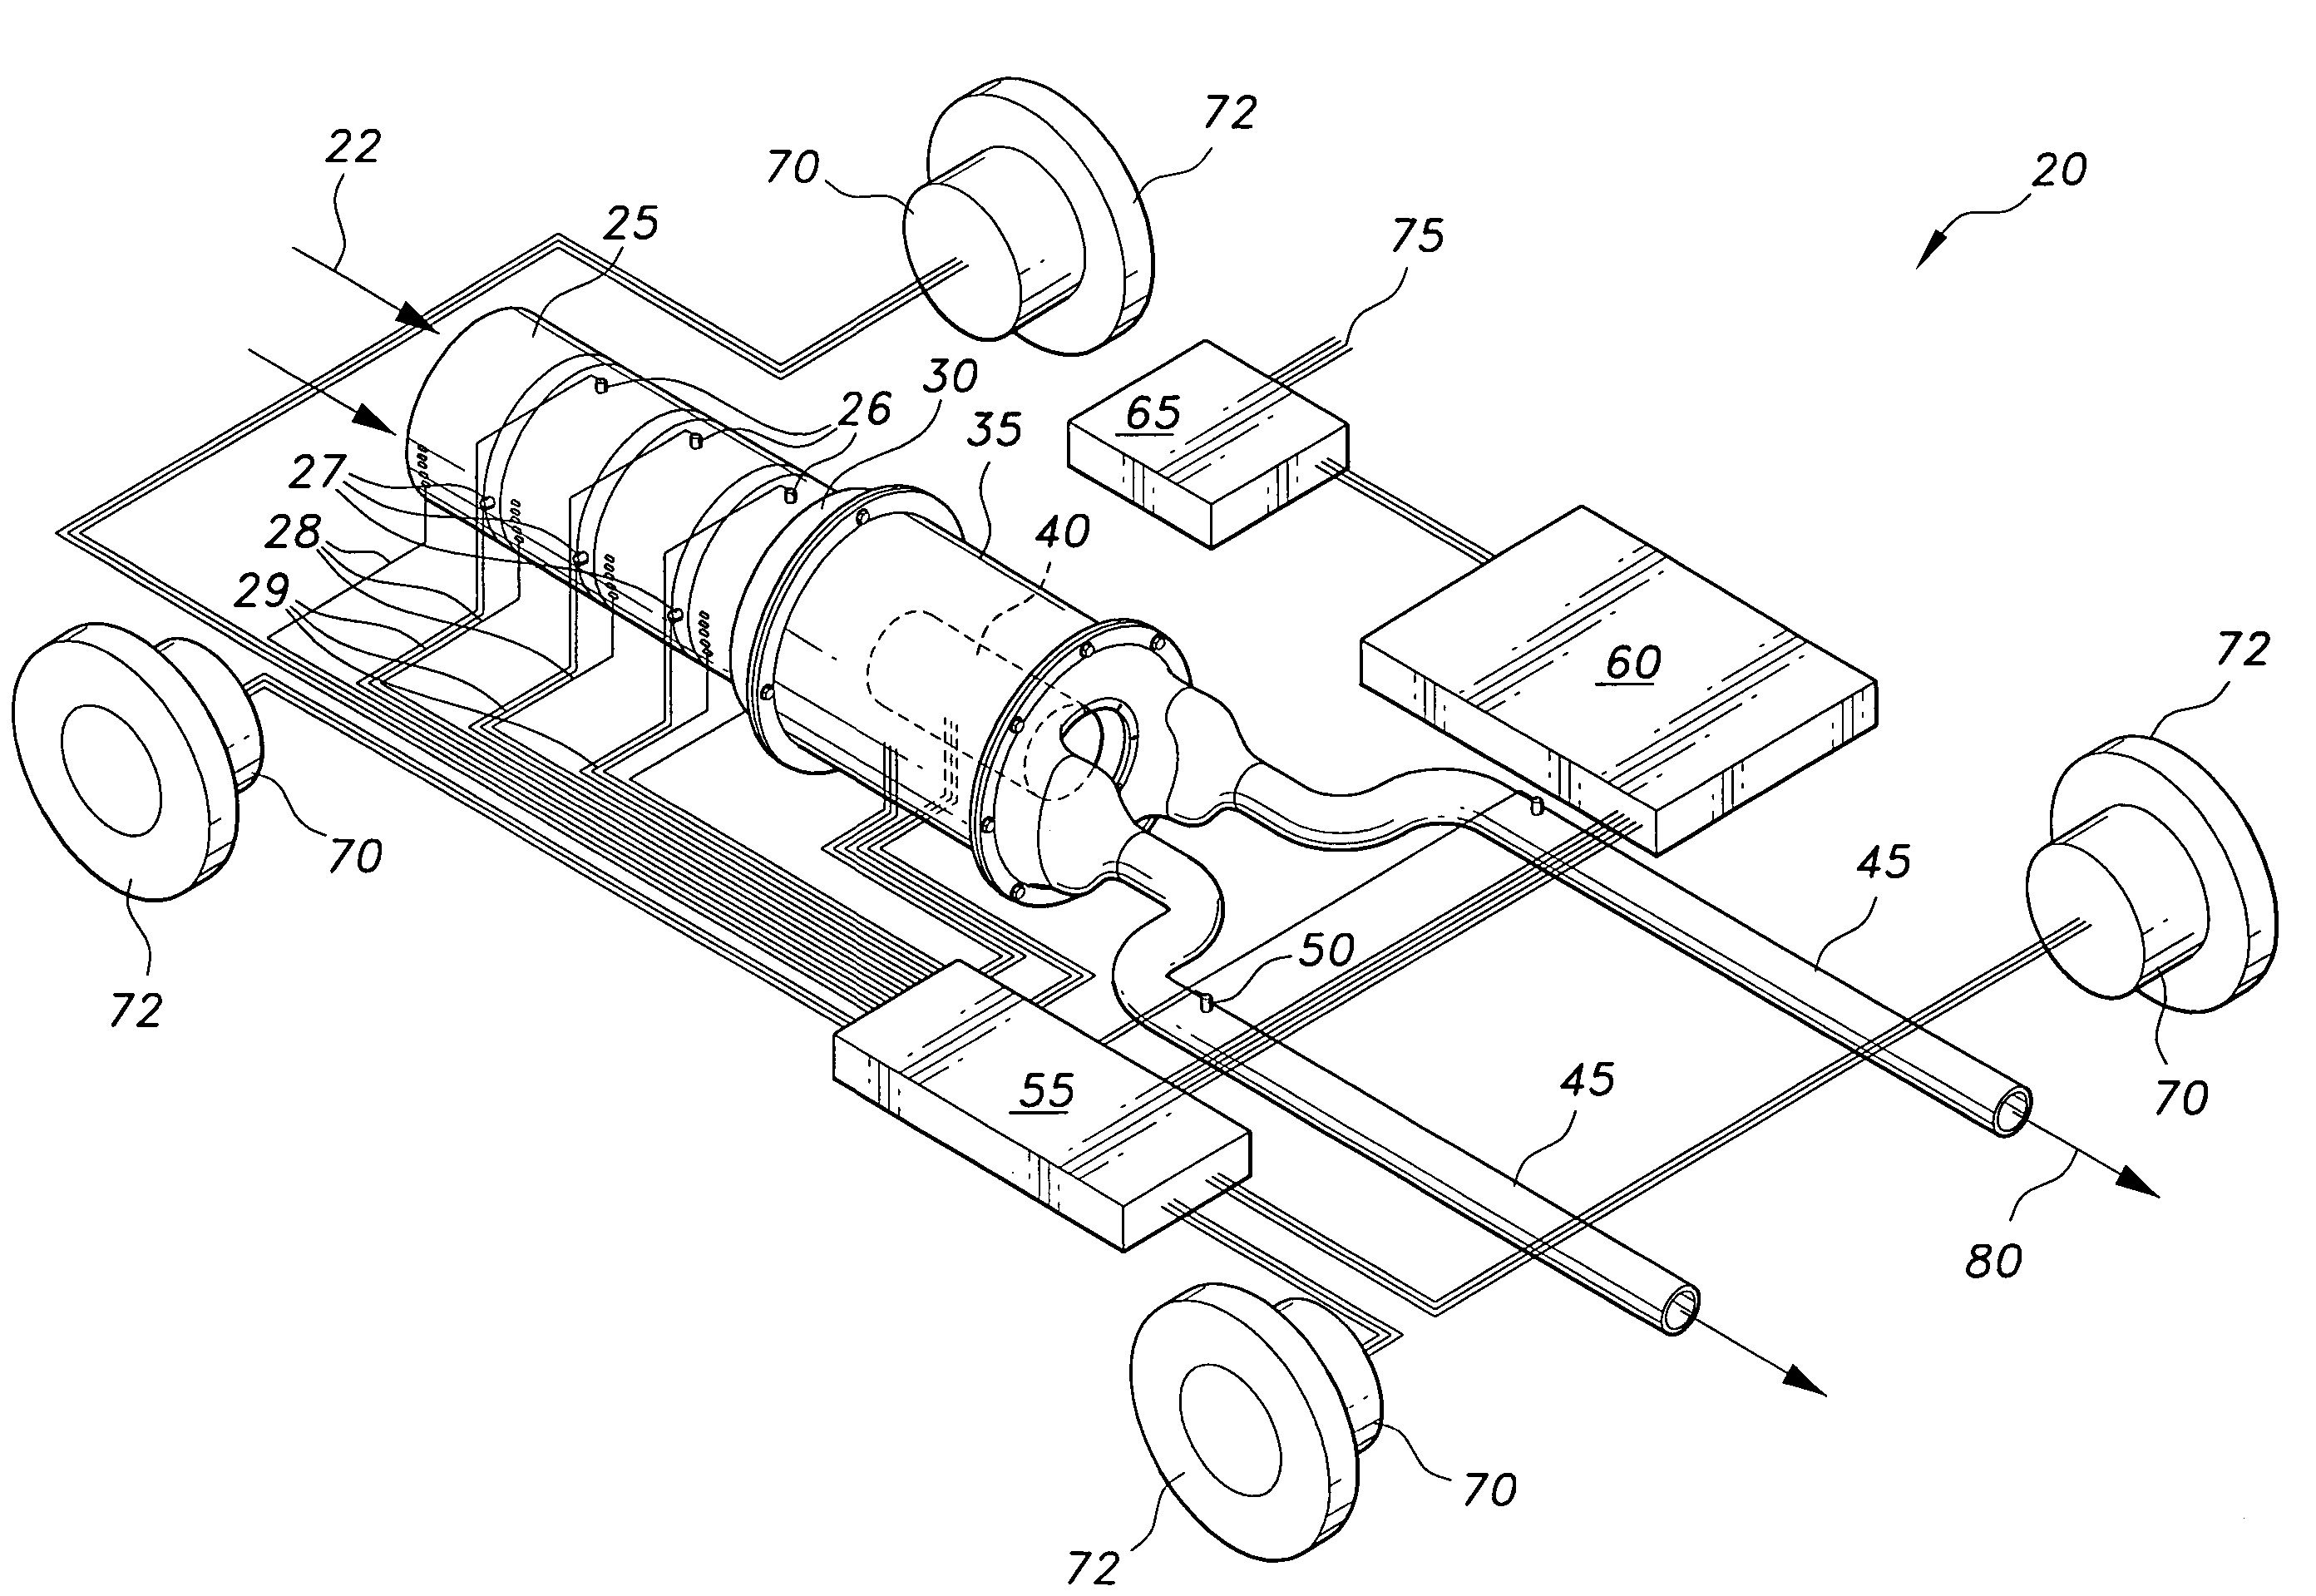 Power system for electrically powered land vehicle